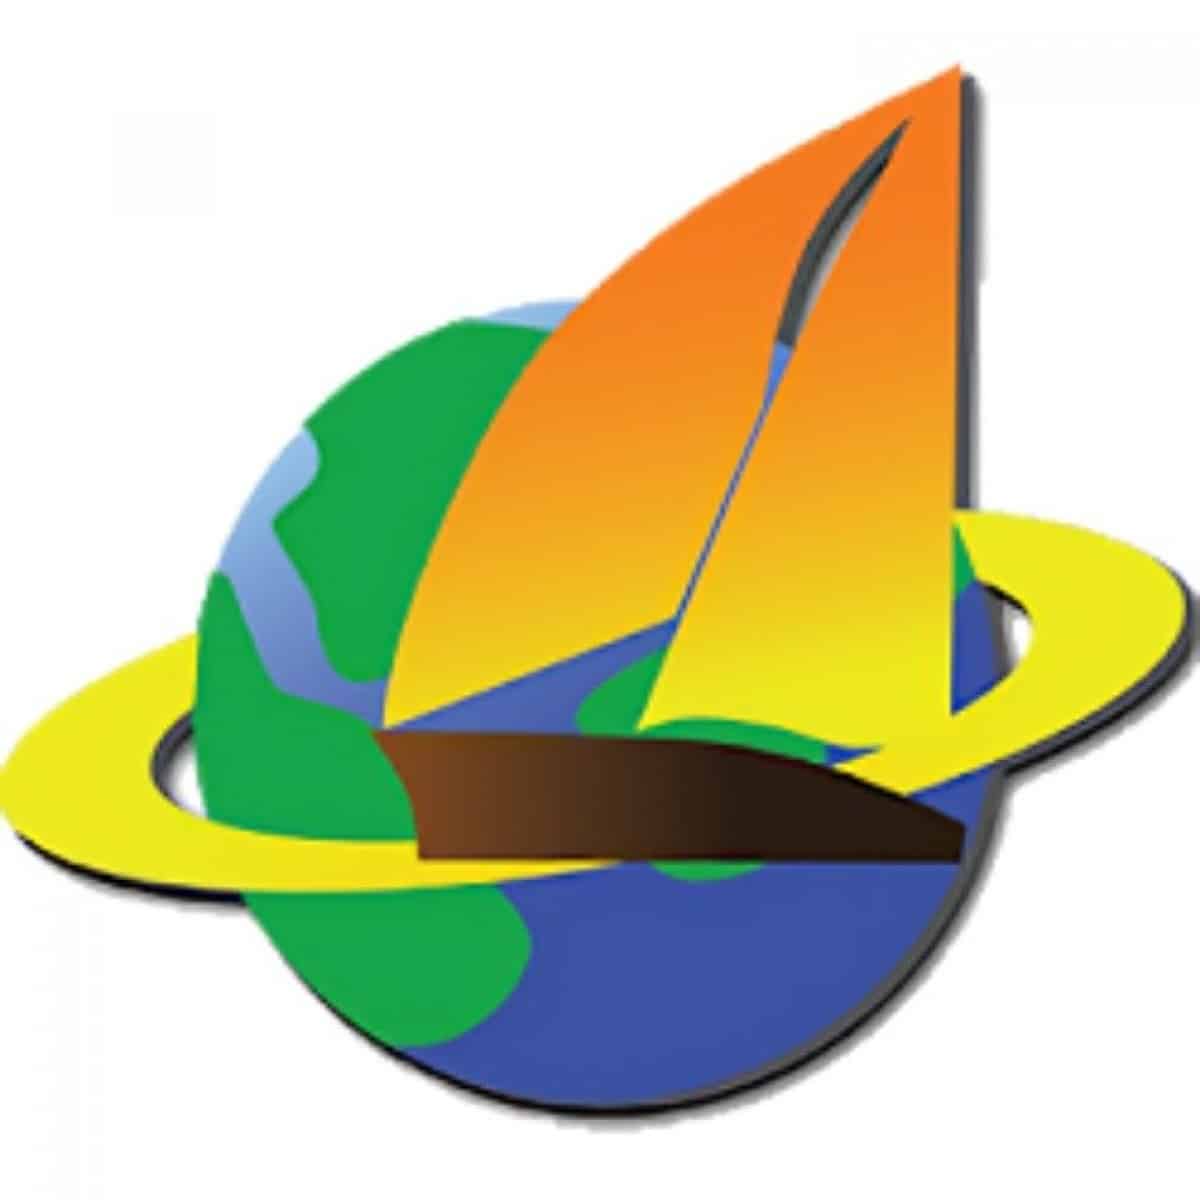 UltraSurf Download for your Windows PC